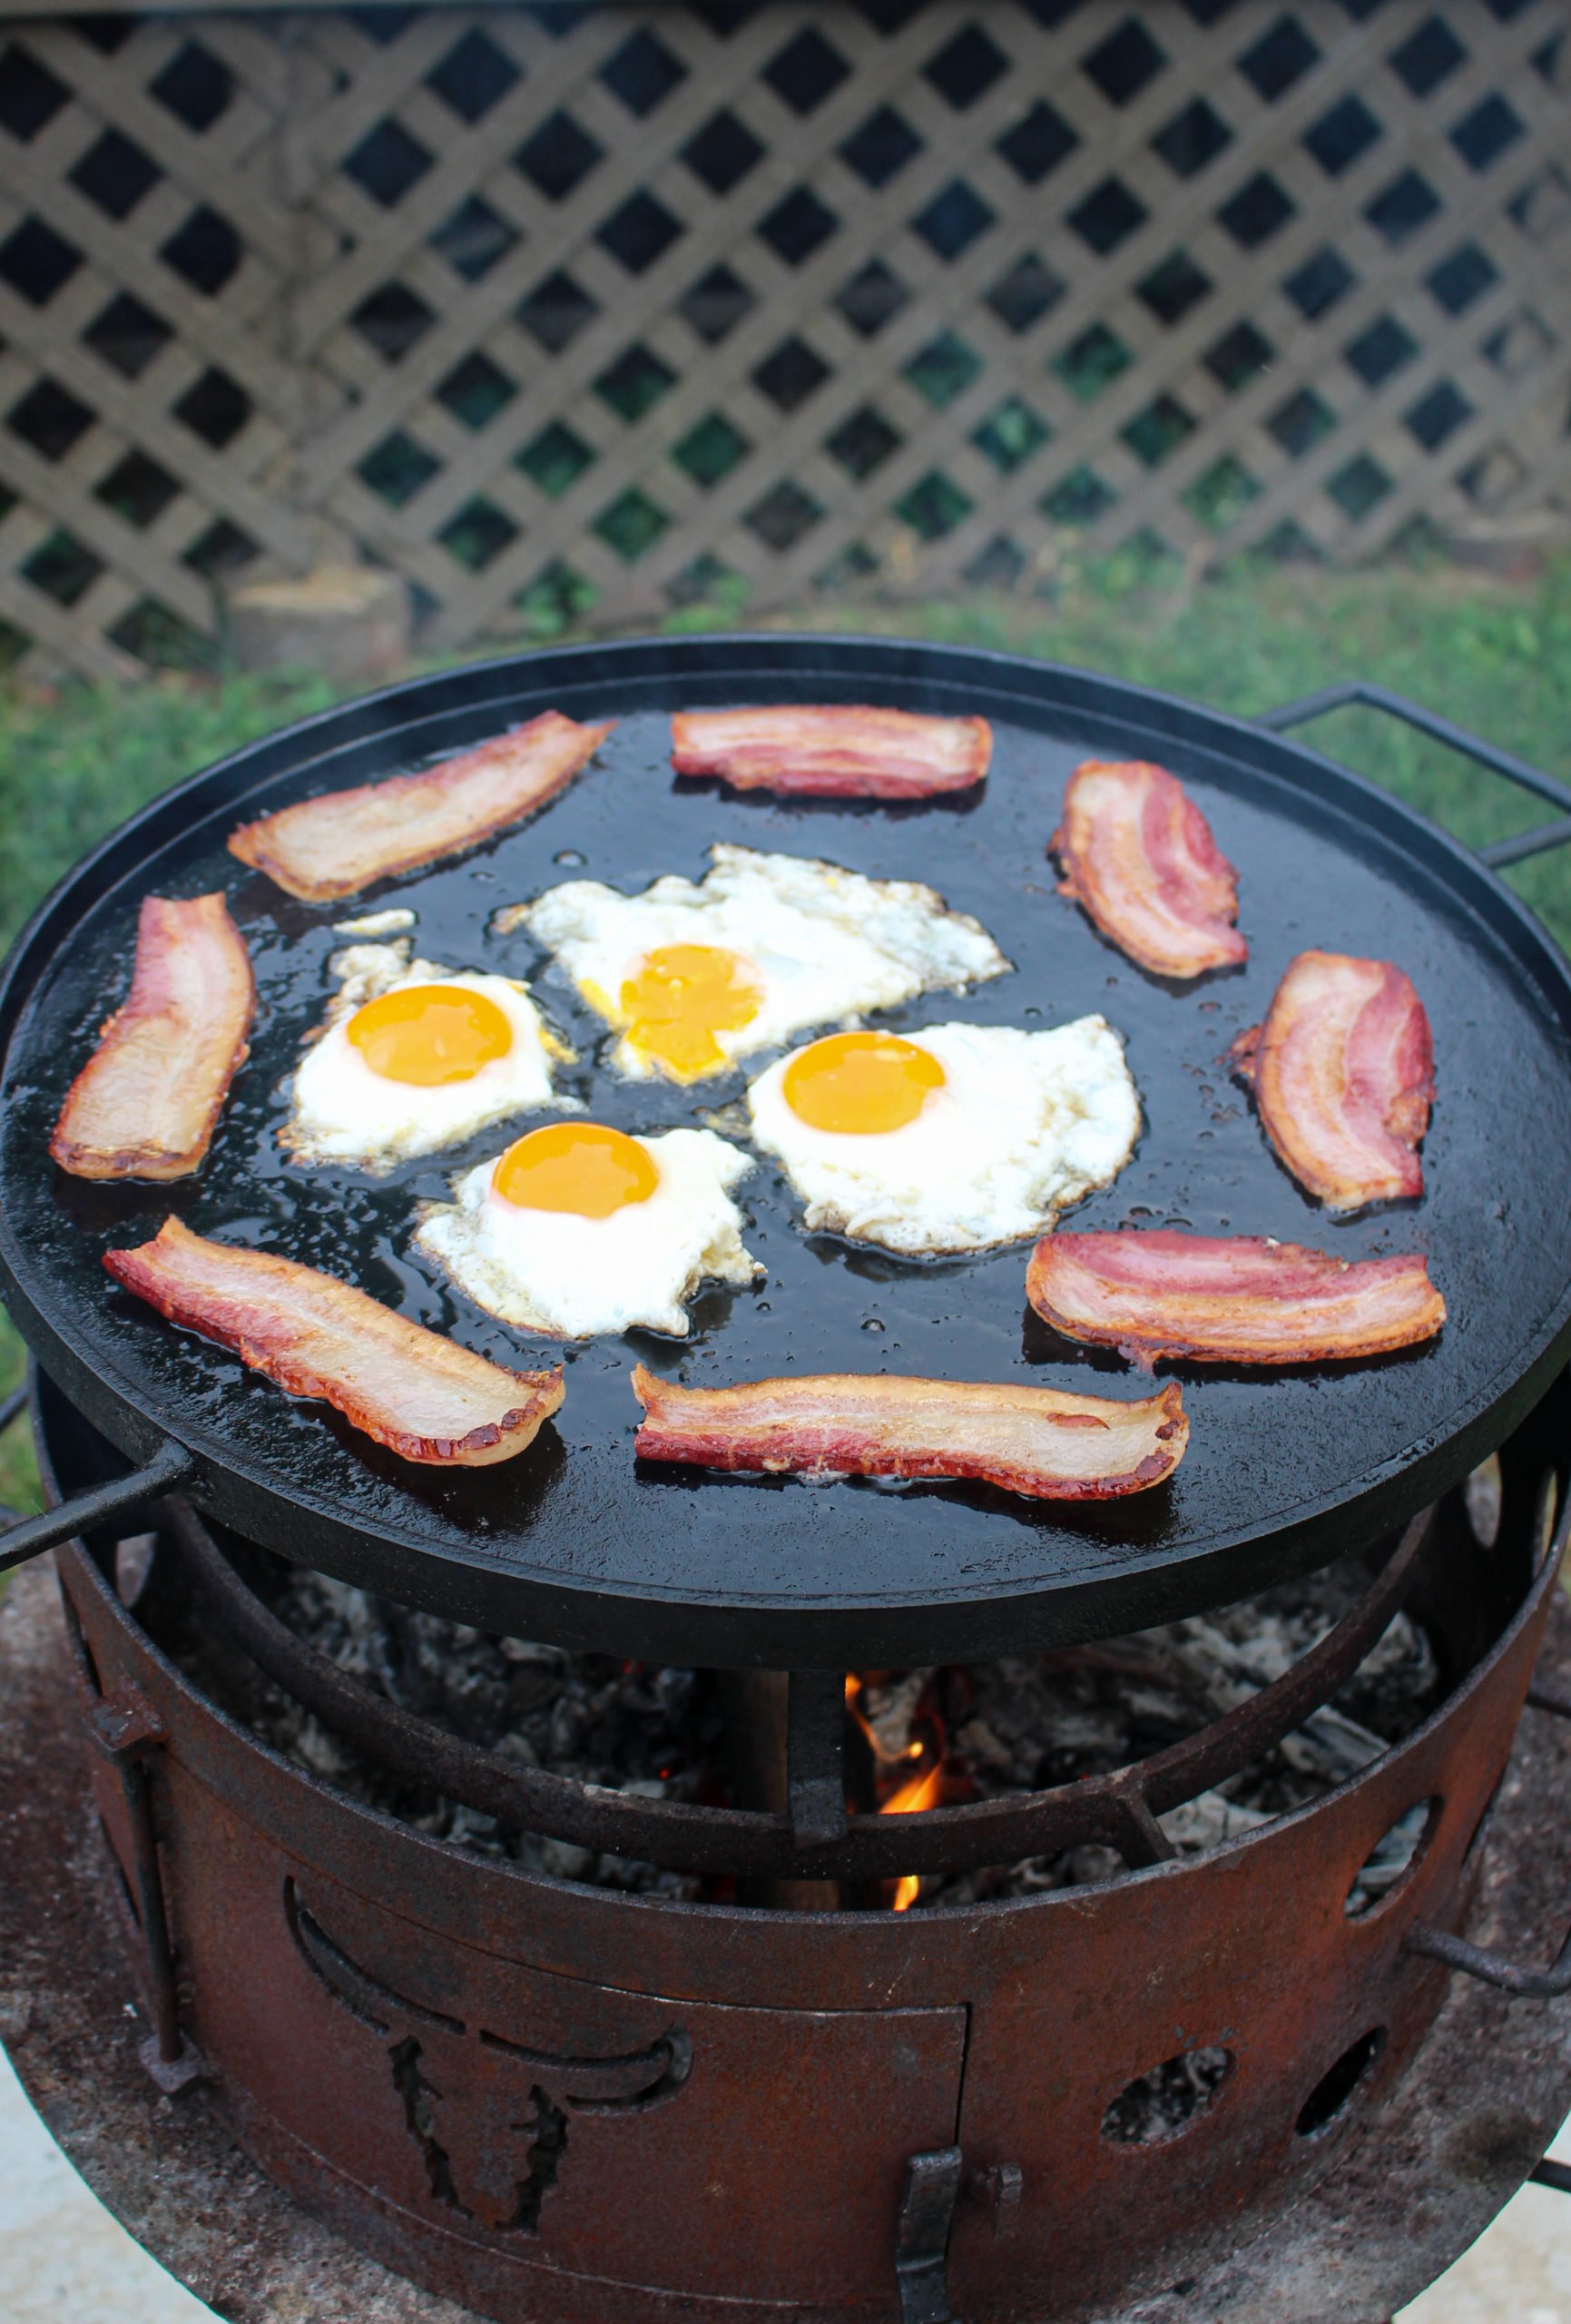 The frying bacon and eggs.